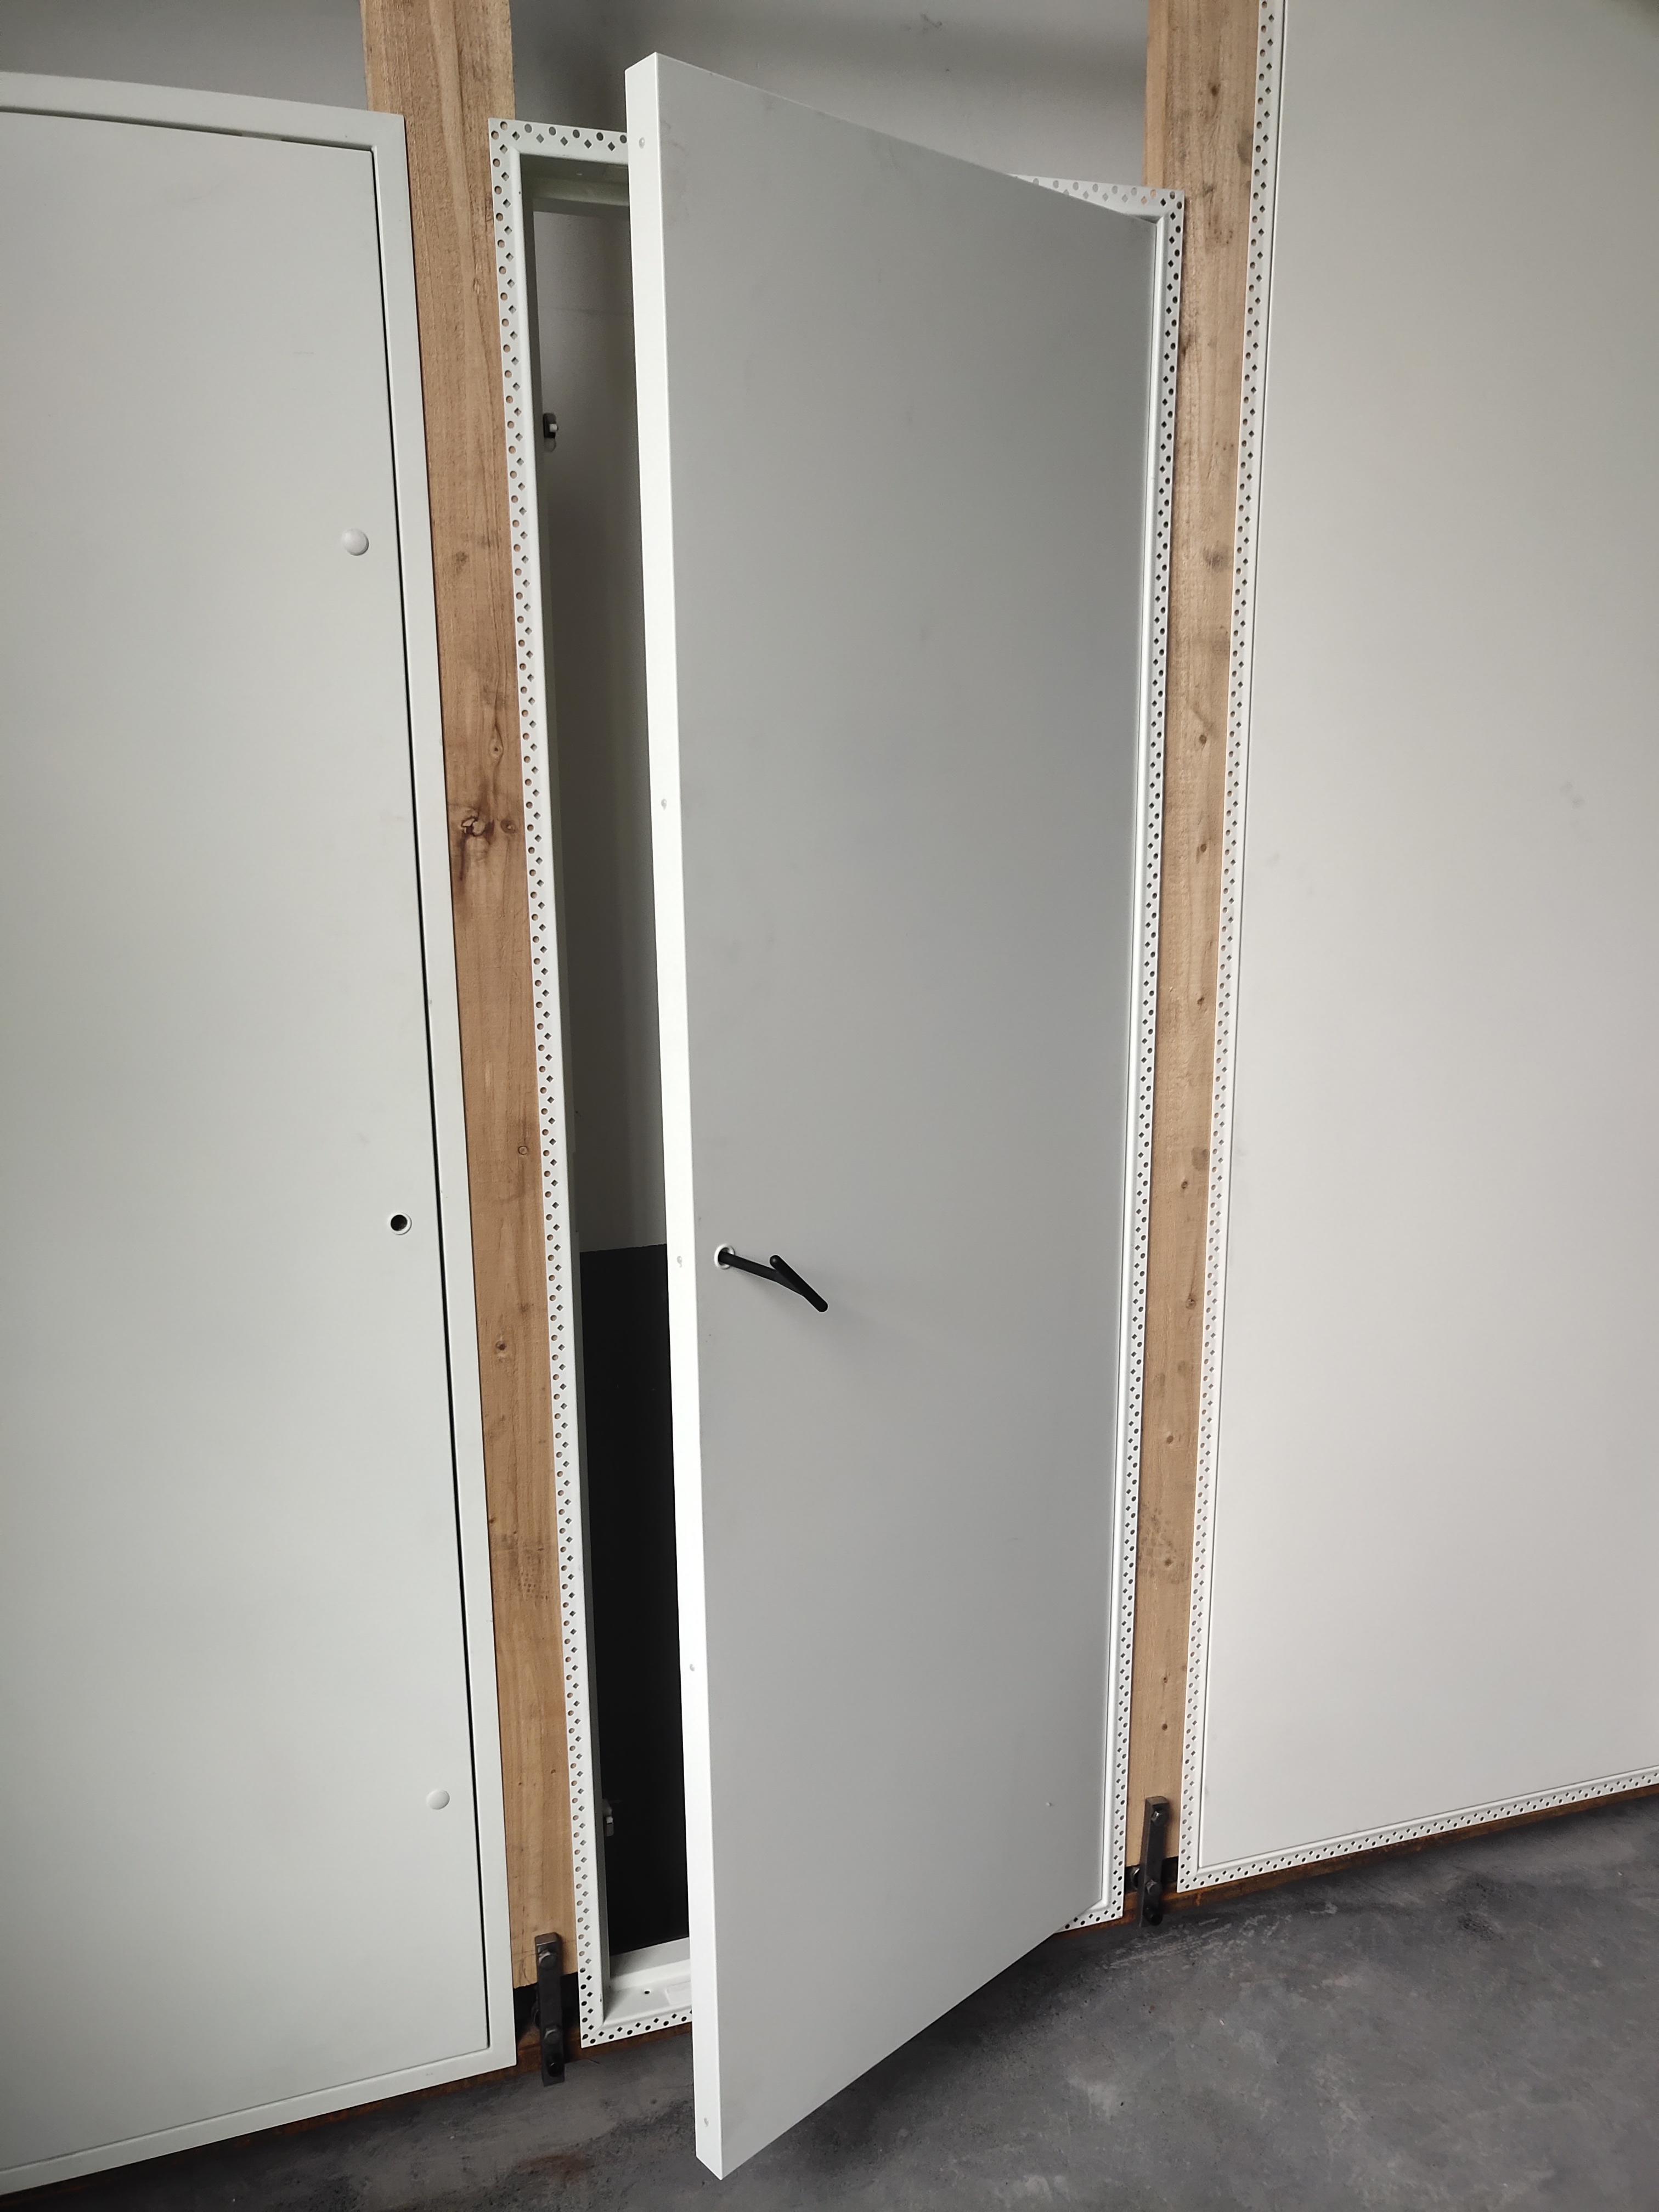 What are the grades of Class A fire doors?